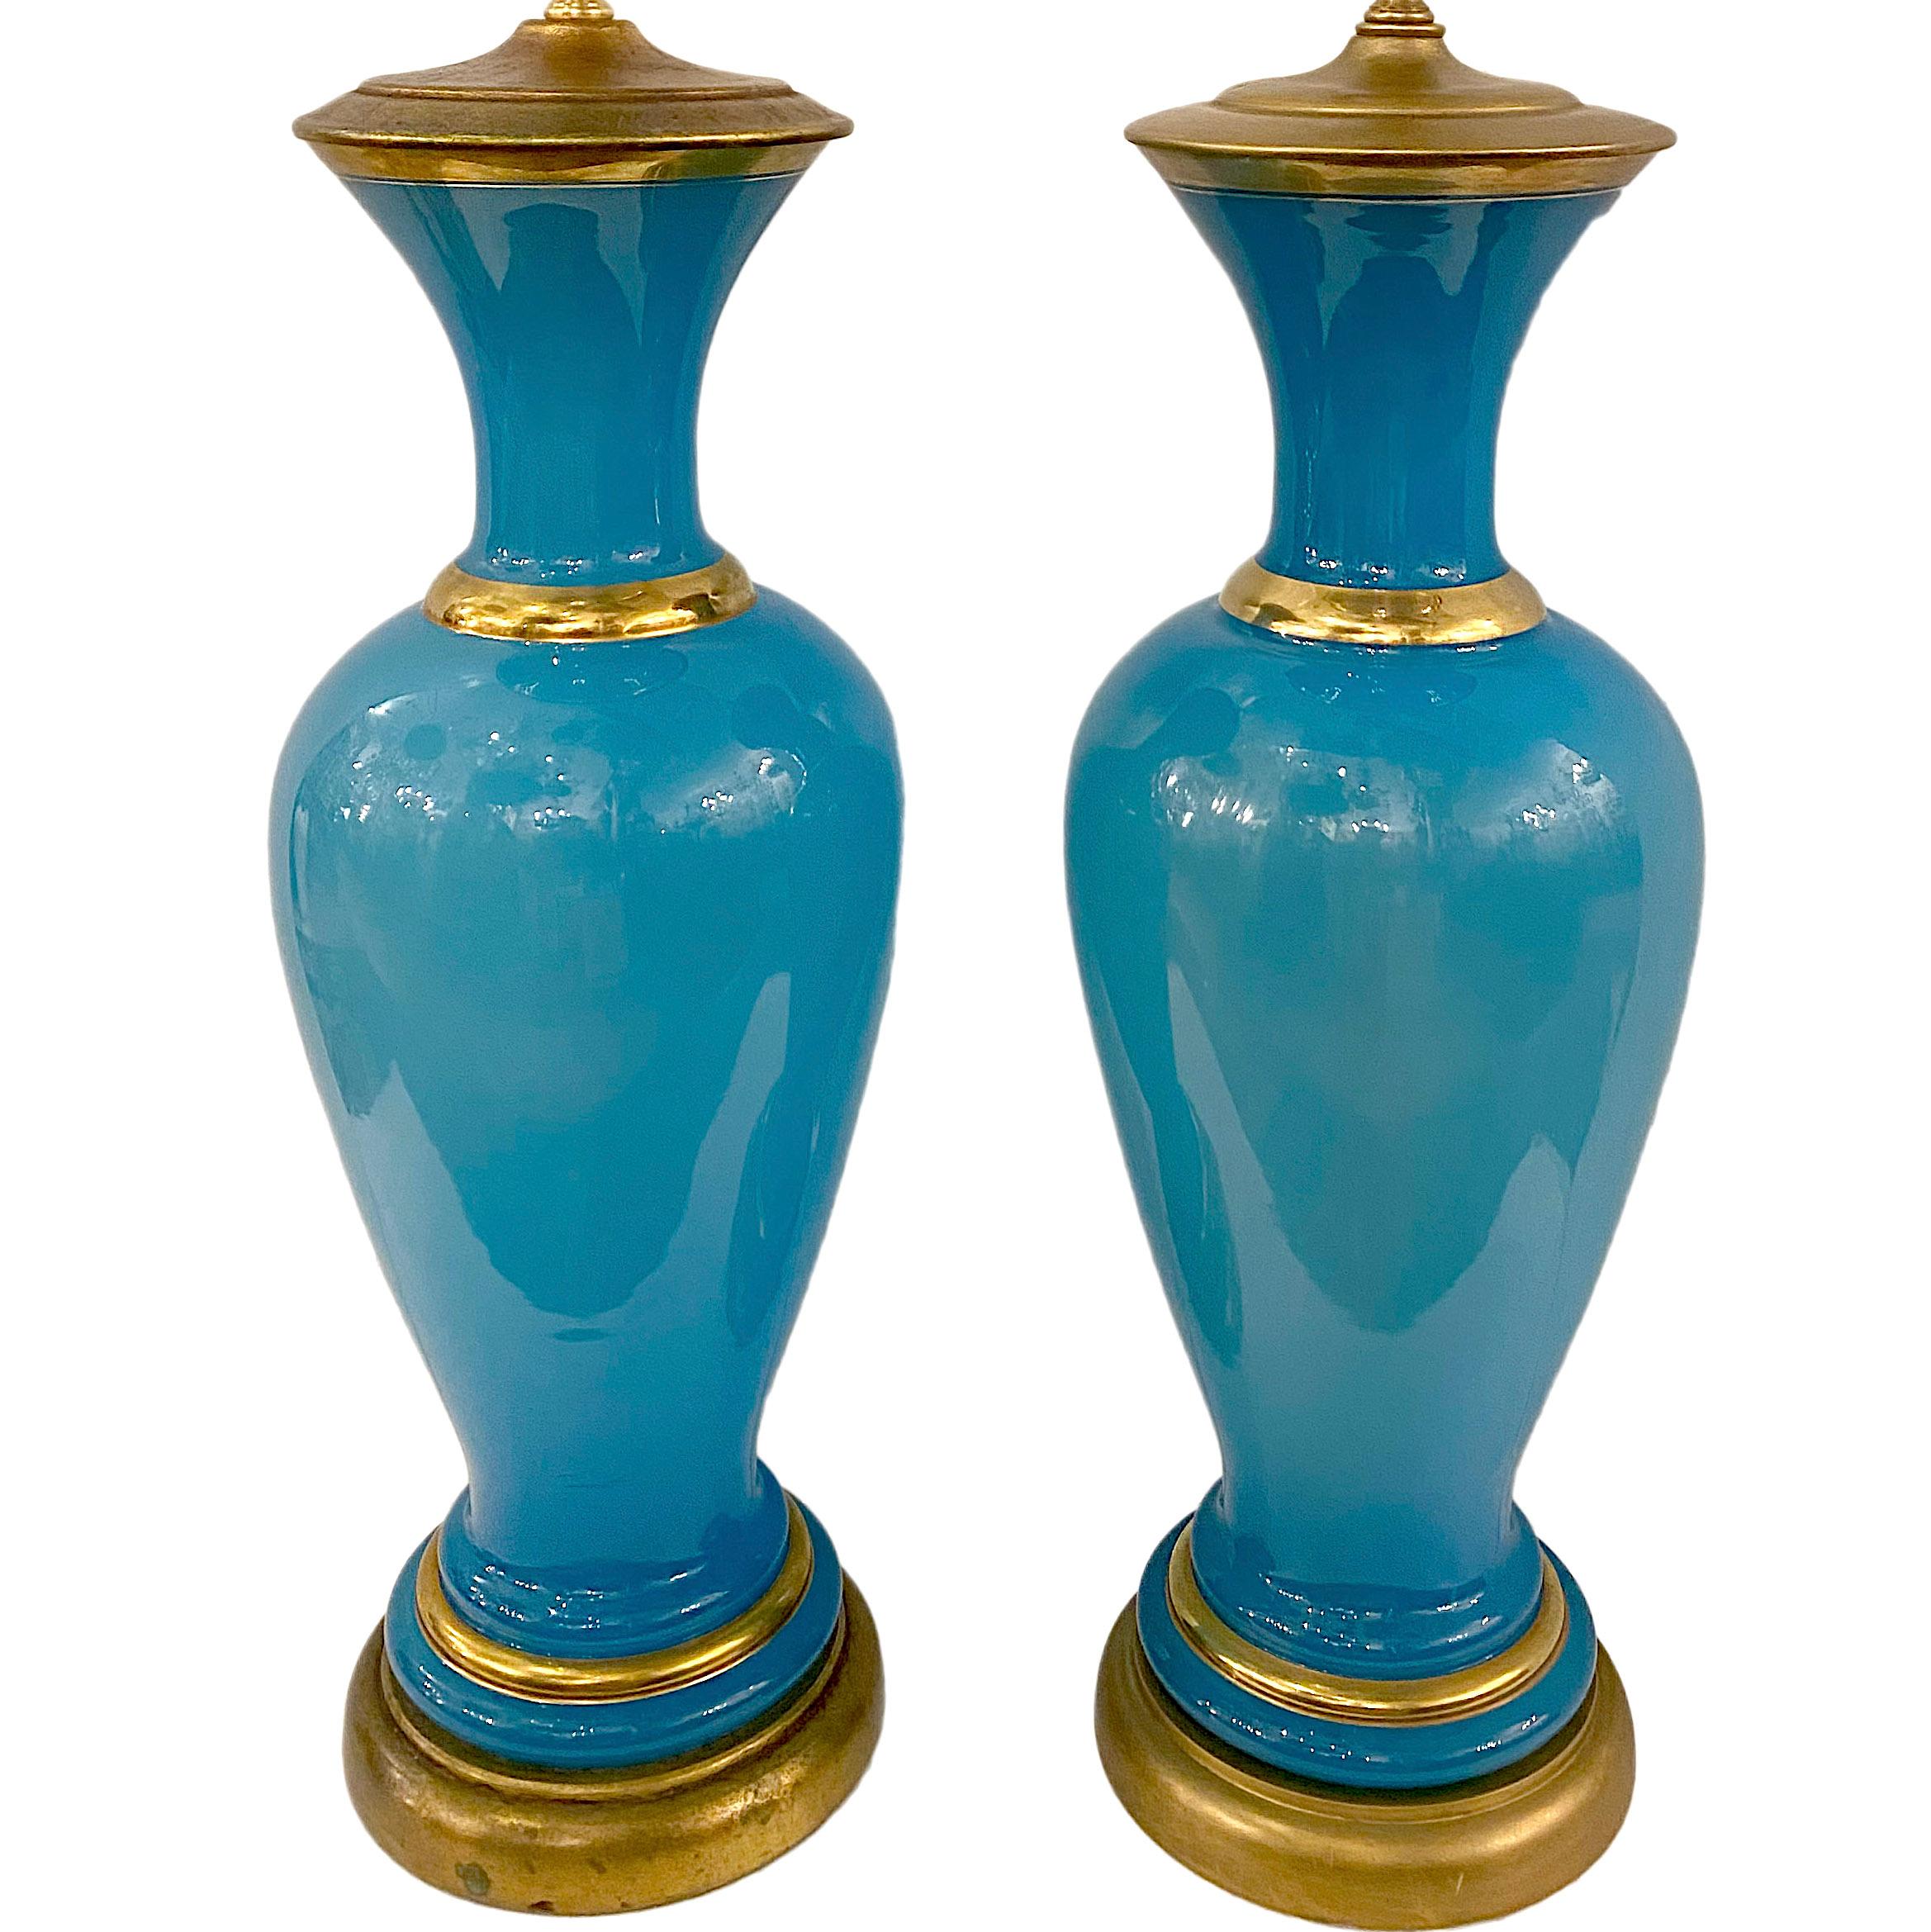 A pair of circa 1930's French blue opaline table lamps with gilt details.

Measurements:
Height of body: 24